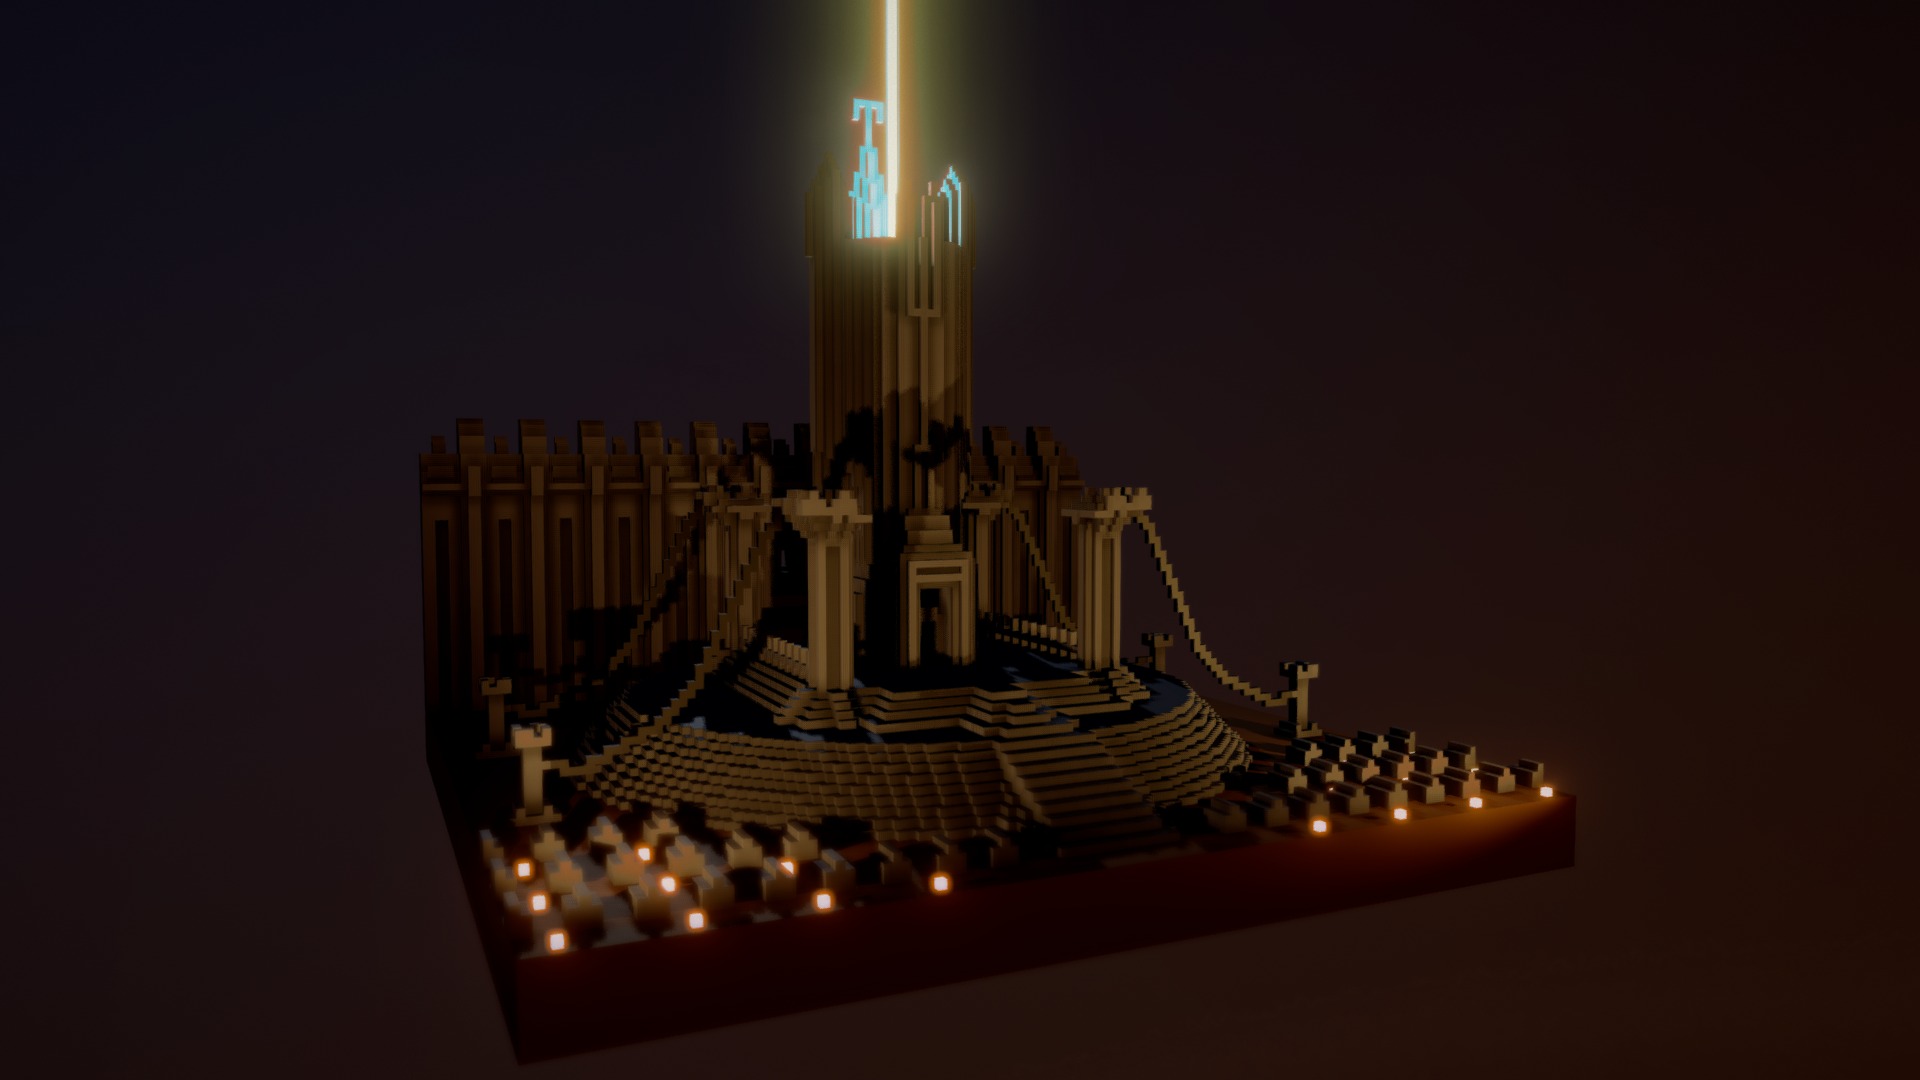 3D model The Dark Tower - This is a 3D model of the The Dark Tower. The 3D model is about a lit up tower with a lit up top.